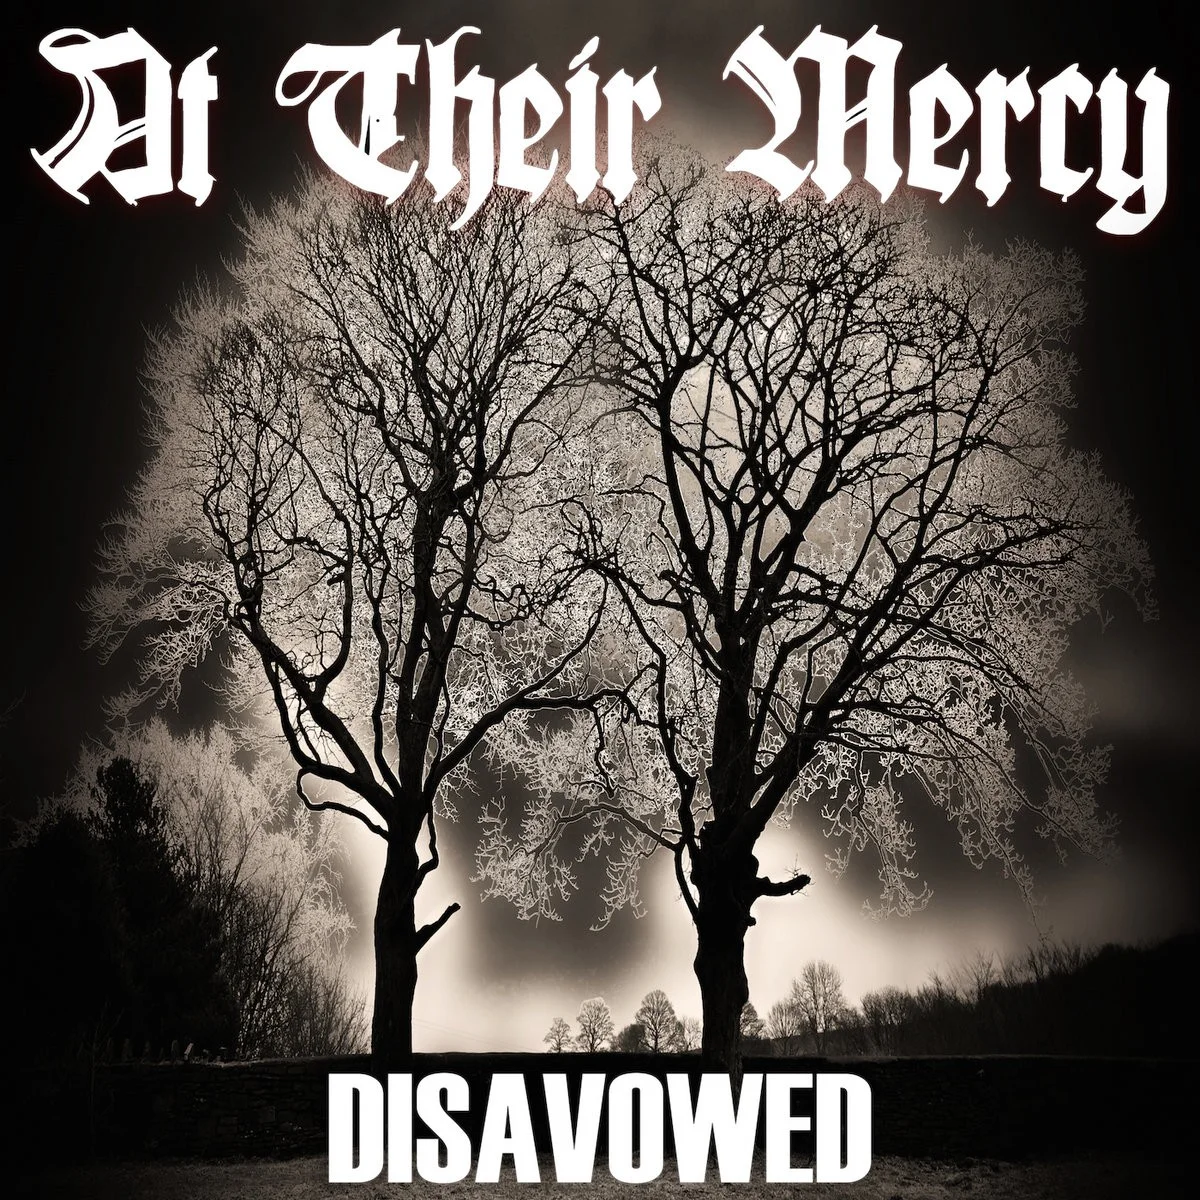 At Their Mercy – Disawowed